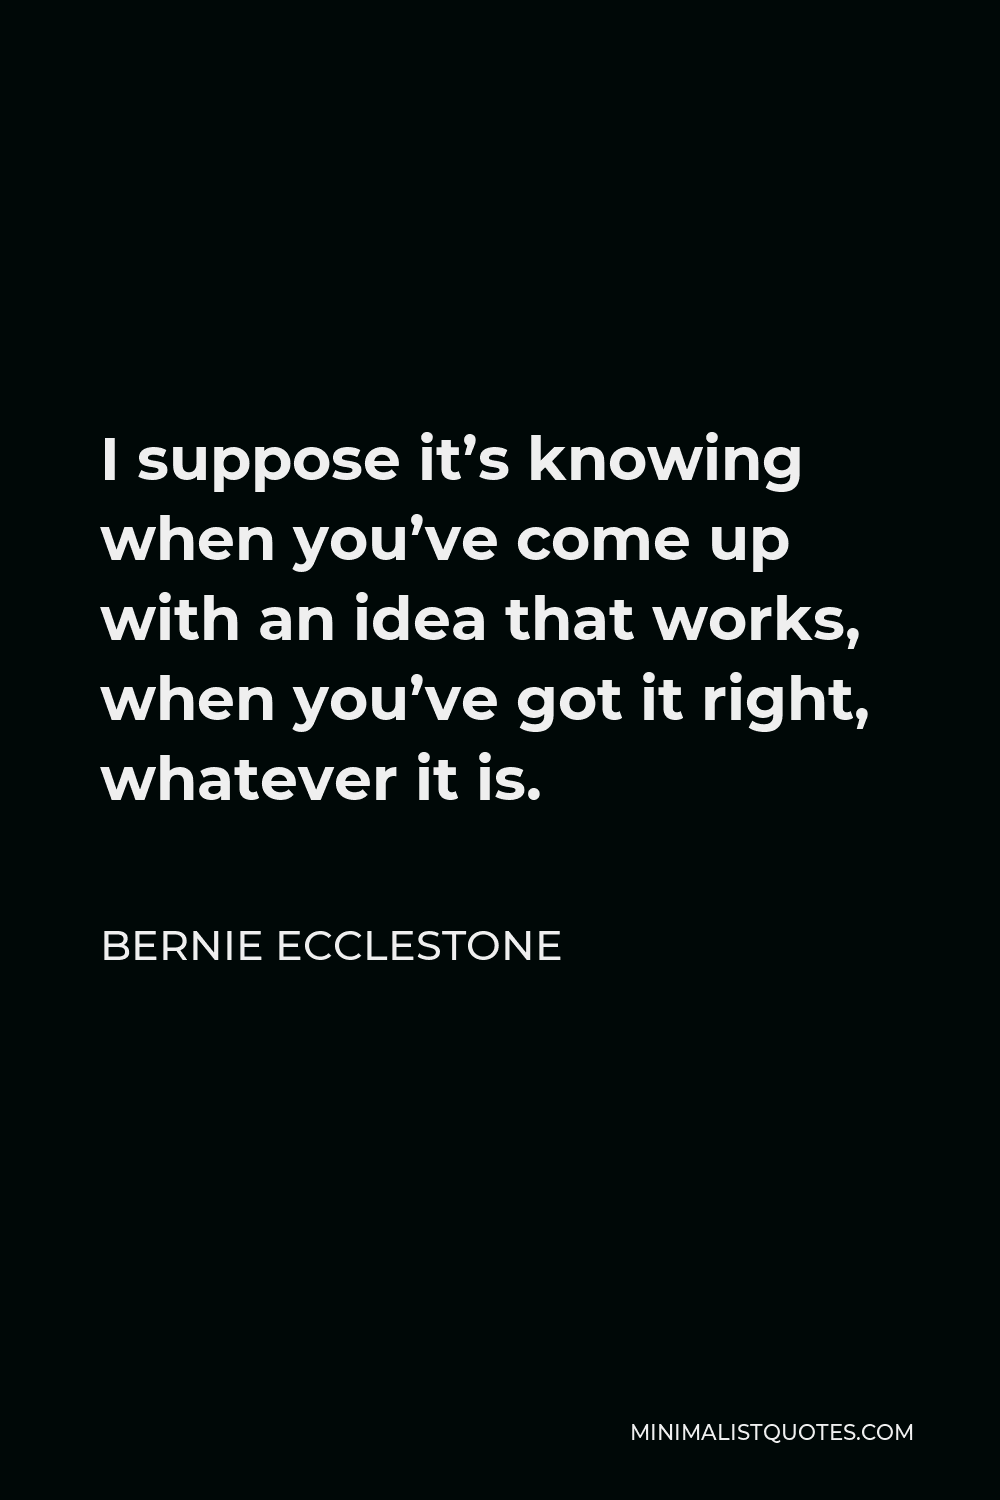 Bernie Ecclestone Quote - I suppose it’s knowing when you’ve come up with an idea that works, when you’ve got it right, whatever it is.